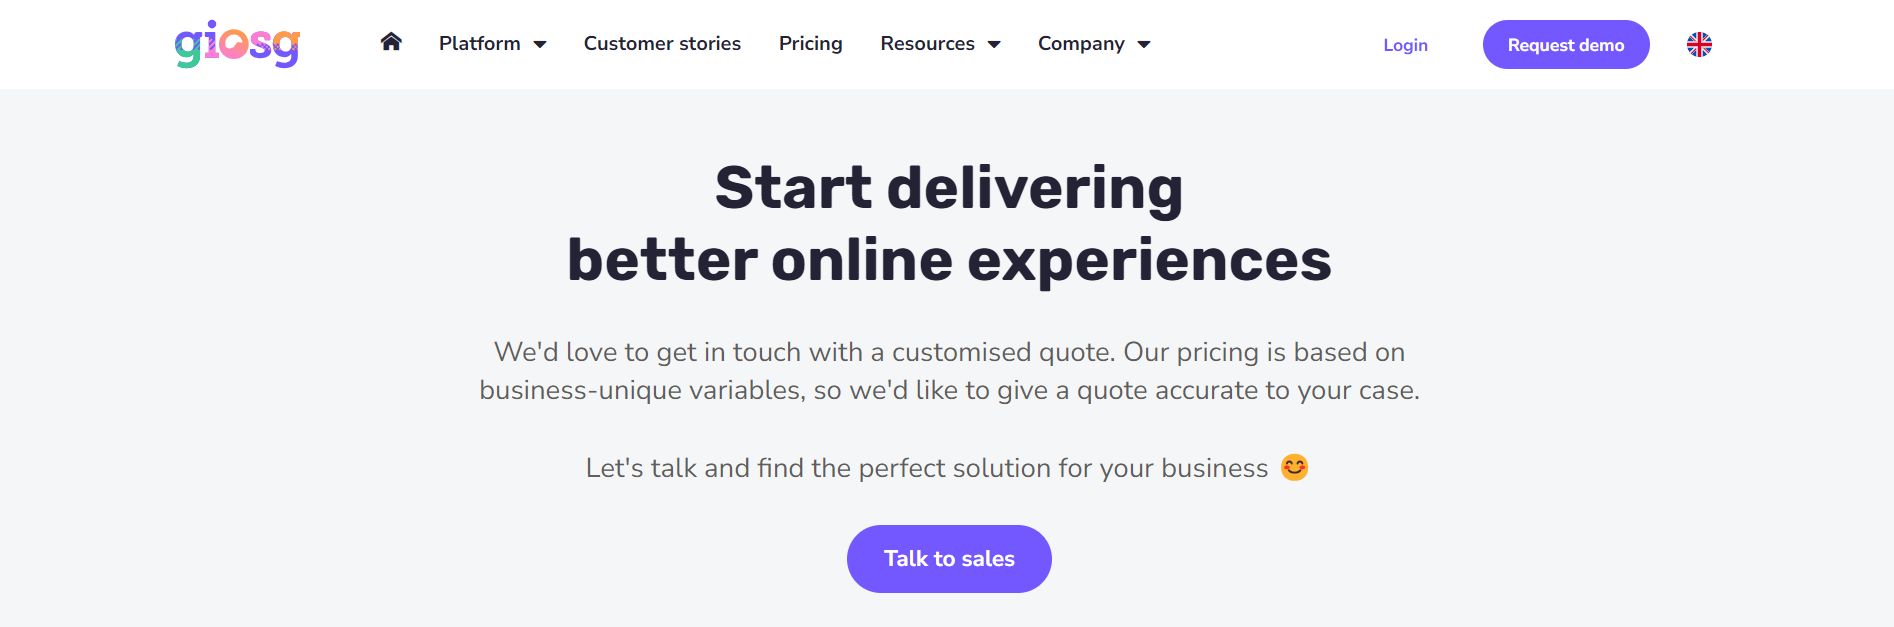 Giosg’s pricing page